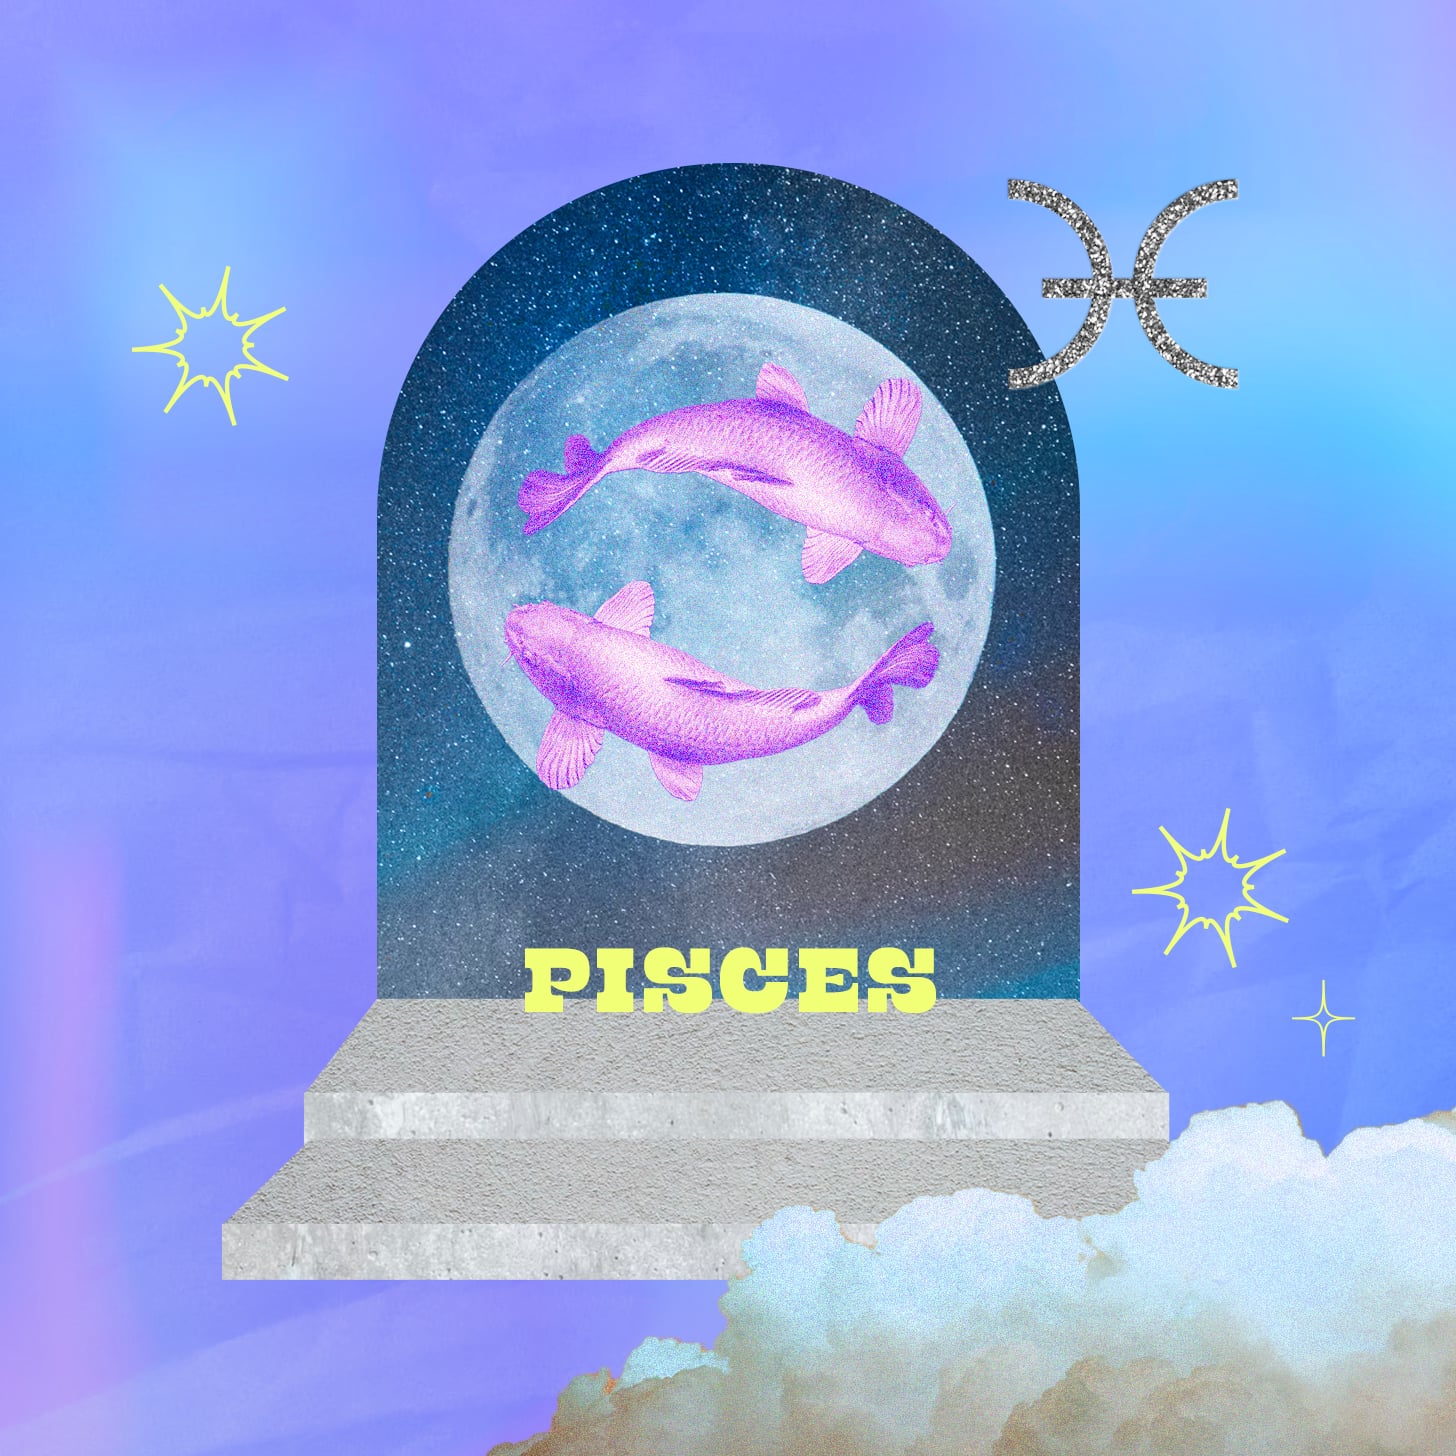 Pisces weekly horoscope for July 17, 2022